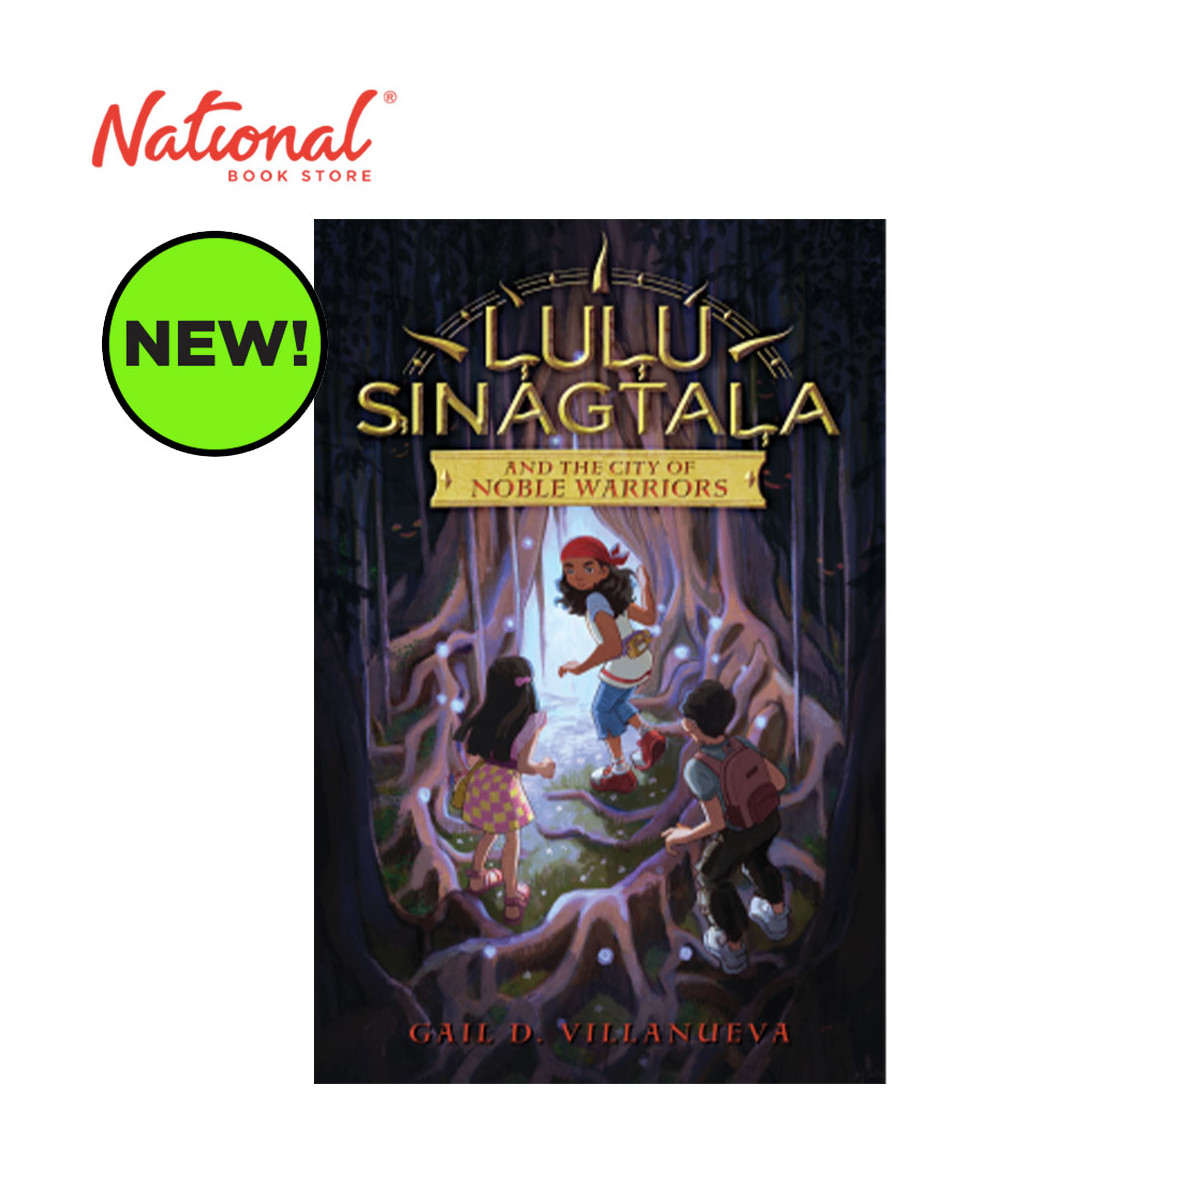 *PRE-ORDER* Lulu Sinagtala And The City Of Noble Warriors By Gail D. Villanueva - Hardcover